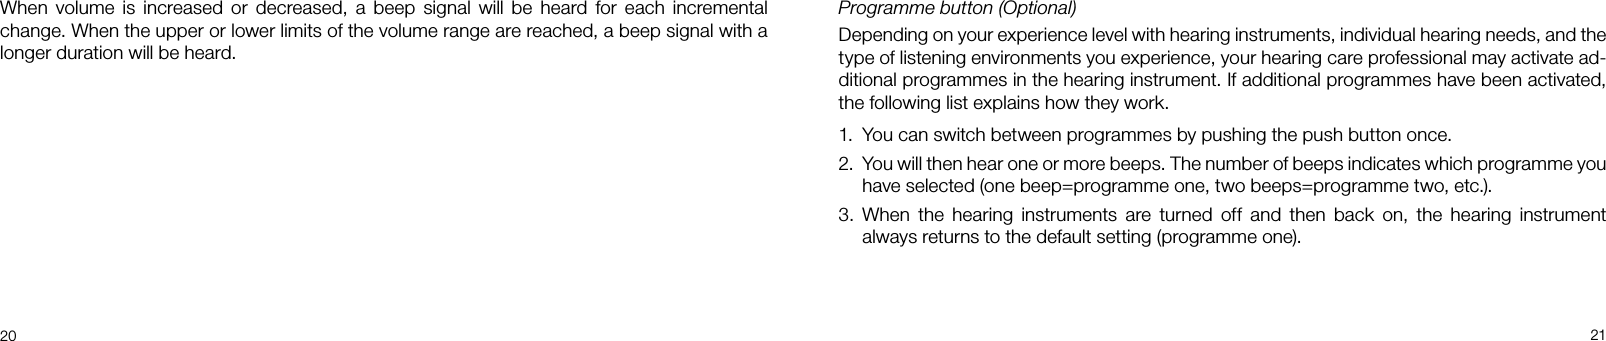 20 21Programme button (Optional)Depending on your experience level with hearing instruments, individual hearing needs, and the type of listening environments you experience, your hearing care professional may activate ad-ditional programmes in the hearing instrument. If additional programmes have been activated, the following list explains how they work.1.  You can switch between programmes by pushing the push button once.2.   You will then hear one or more beeps. The number of beeps indicates which programme you have selected (one beep=programme one, two beeps=programme two, etc.). 3.  When  the  hearing  instruments  are  turned  off  and  then  back  on,  the  hearing  instrument always returns to the default setting (programme one).When  volume  is  increased  or decreased,  a  beep  signal will  be heard  for  each incremental change. When the upper or lower limits of the volume range are reached, a beep signal with a longer duration will be heard.